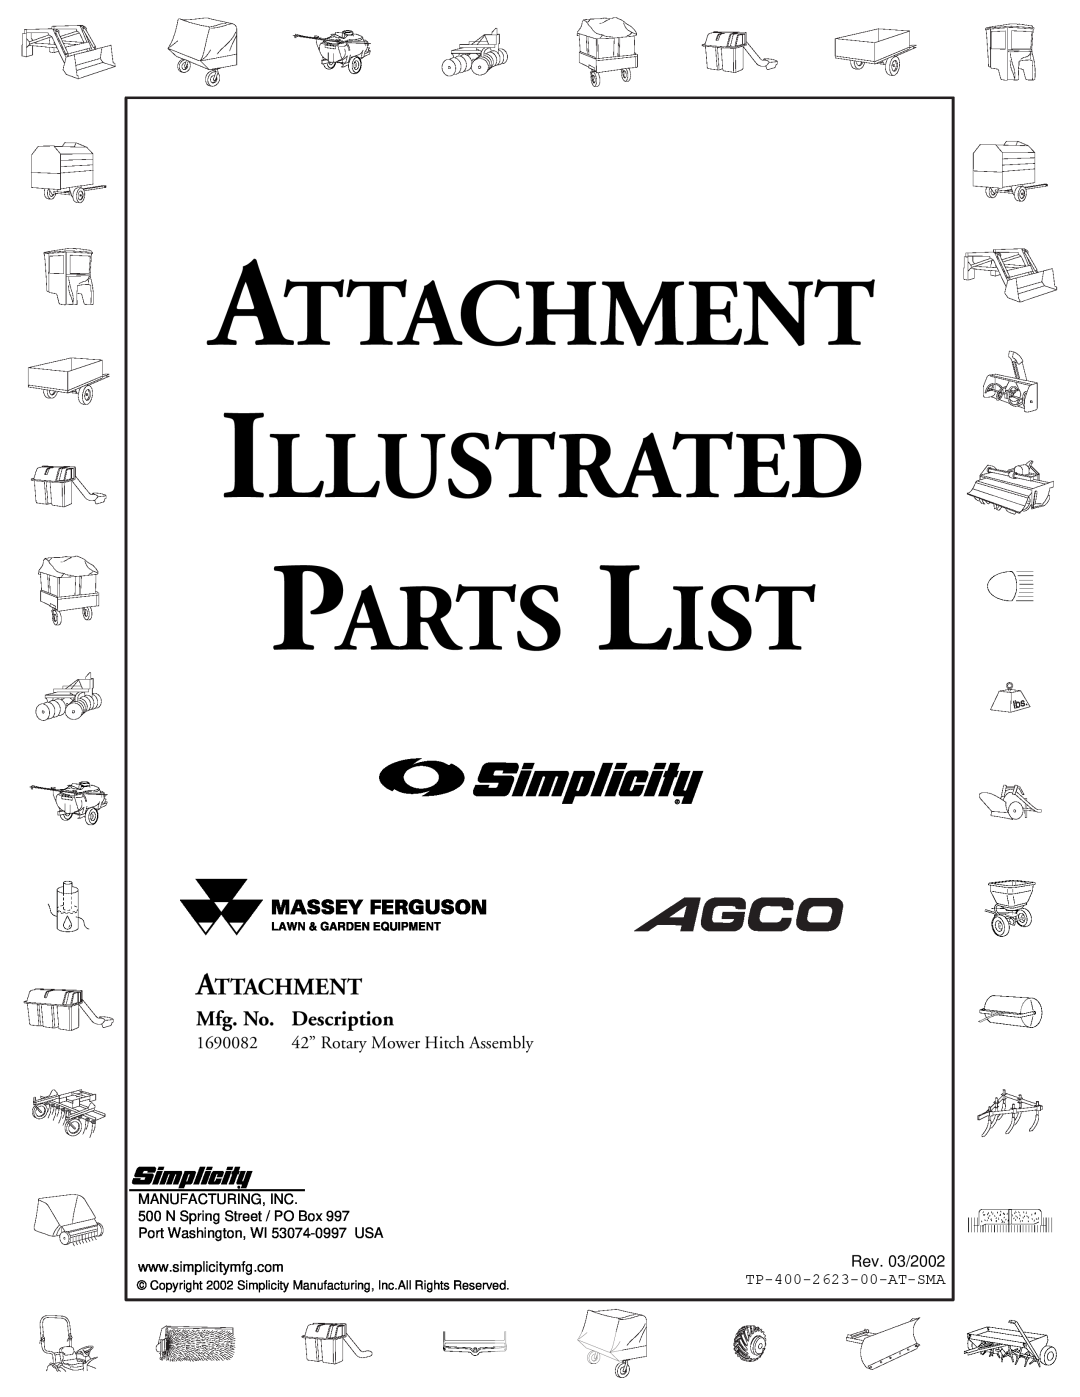 Snapper 2623 manual Attachment Illustrated Parts List, Mfg. No. Description, 1690082 42” Rotary Mower Hitch Assembly 